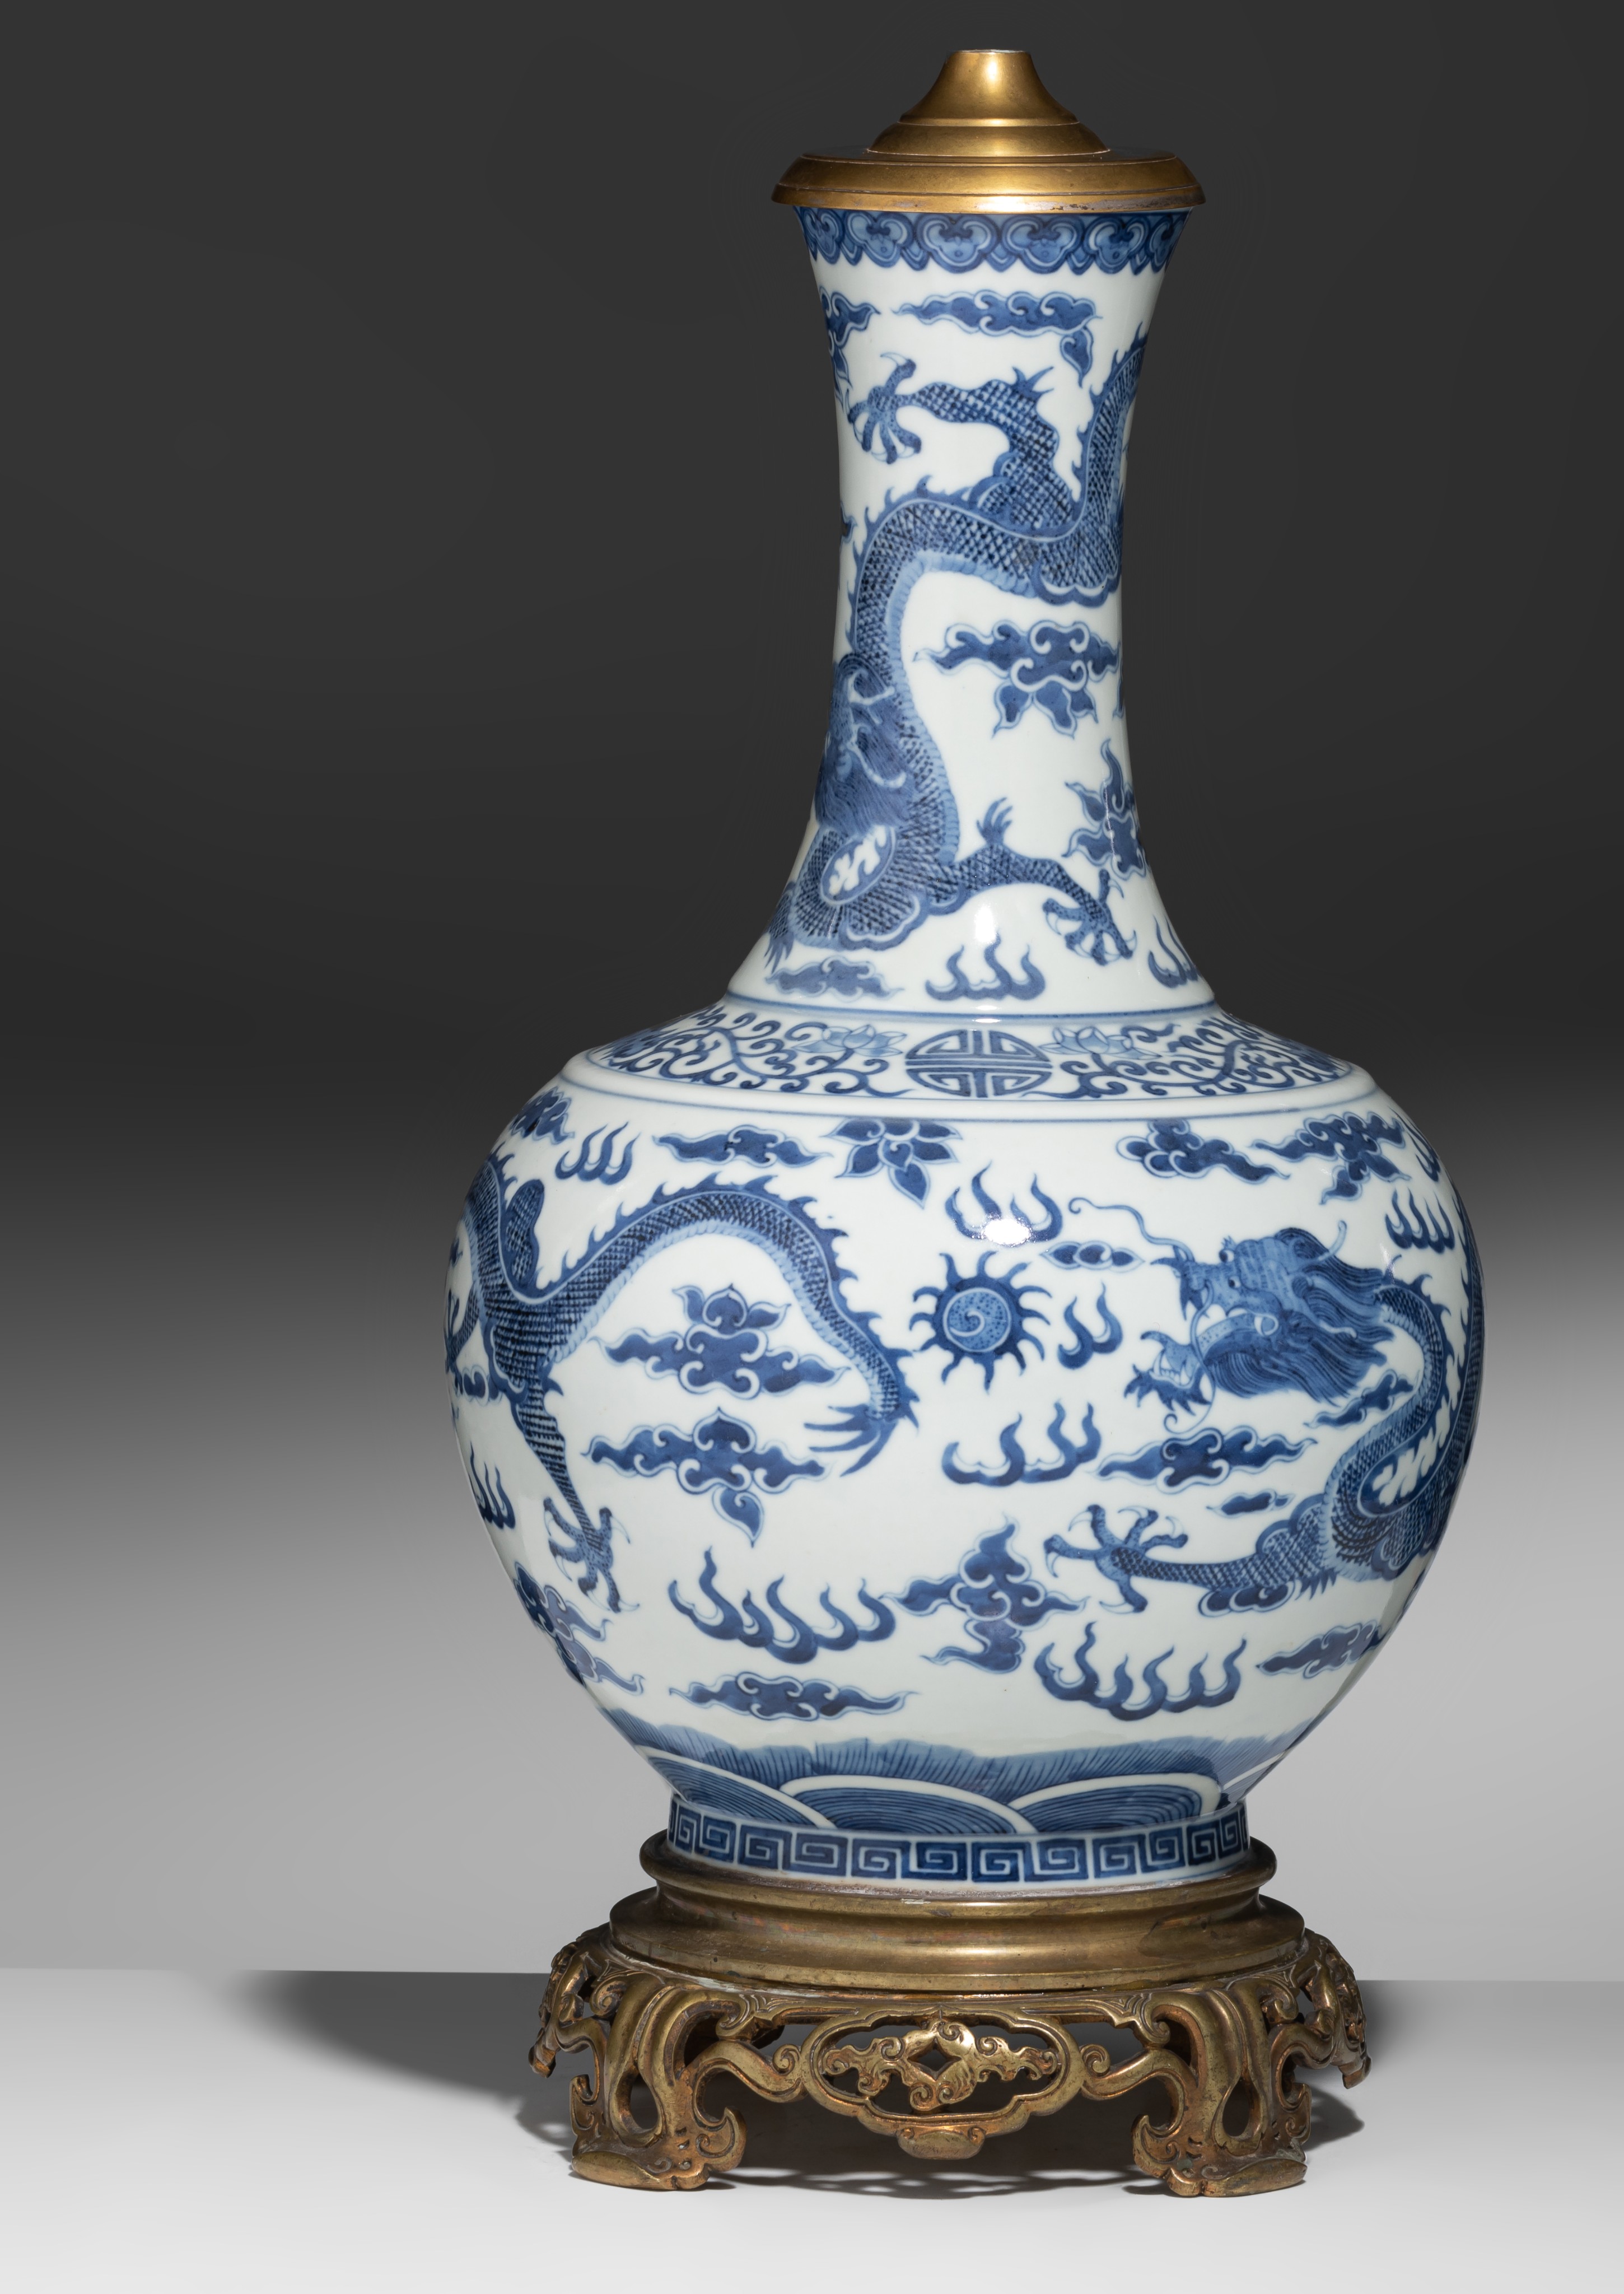 A Chinese blue and white 'Dragons' bottle vase and bronze mounts, with a Guangxu mark, Total H 50 cm - Image 4 of 8